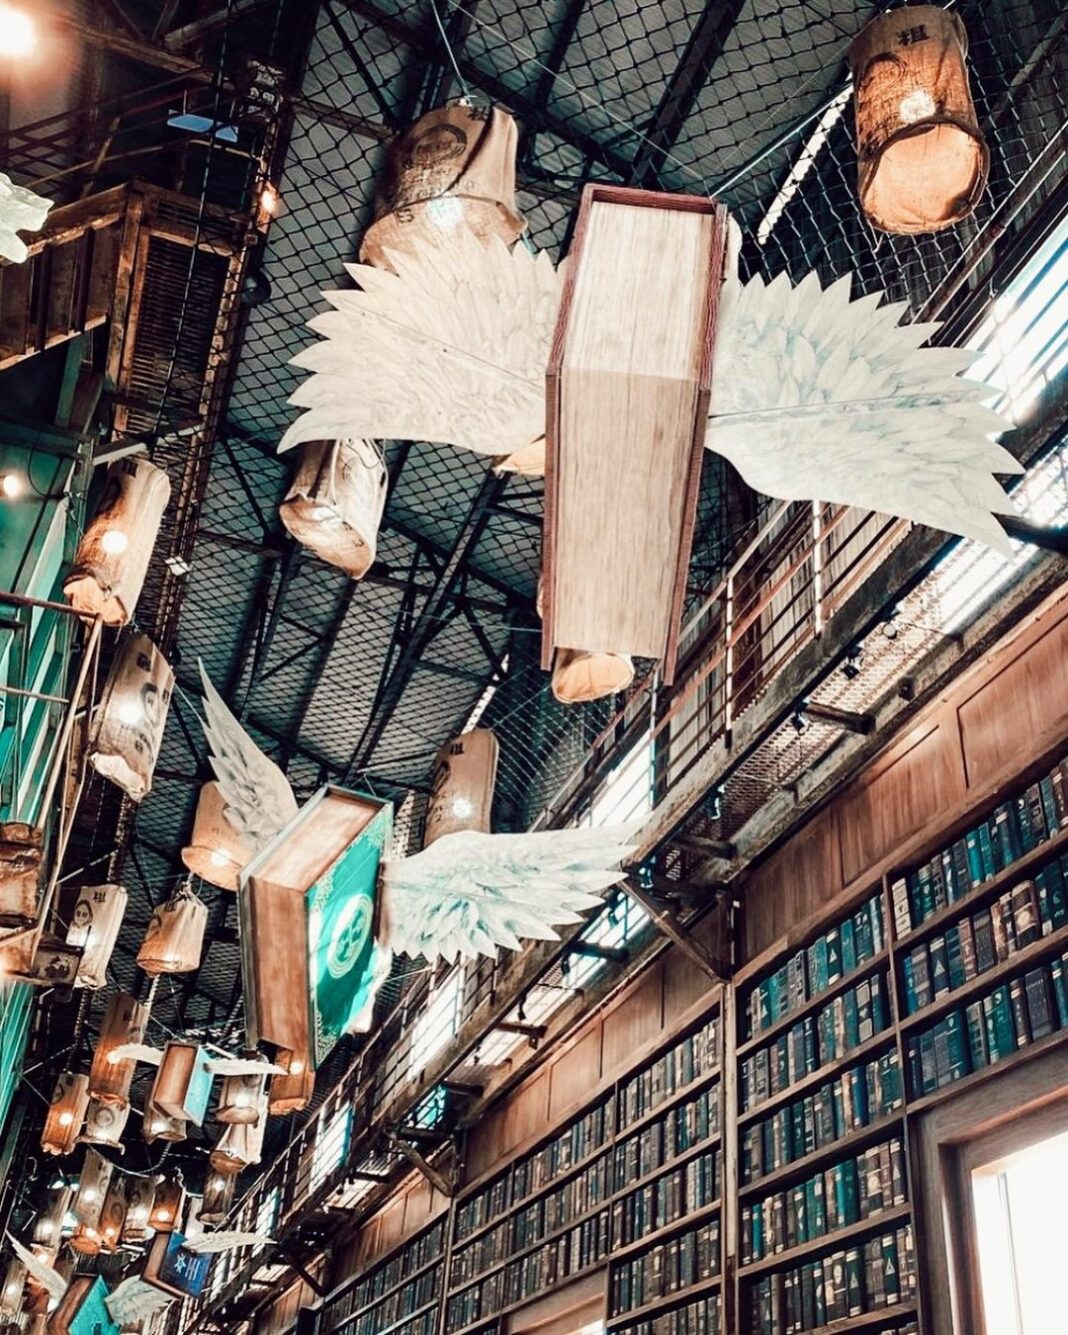 ▲The picture-perfect scenes include a magic corridor, huge windows, a flying broom, with all kinds of magical elements. (Courtesy of @jennifer.tww/Instagram)